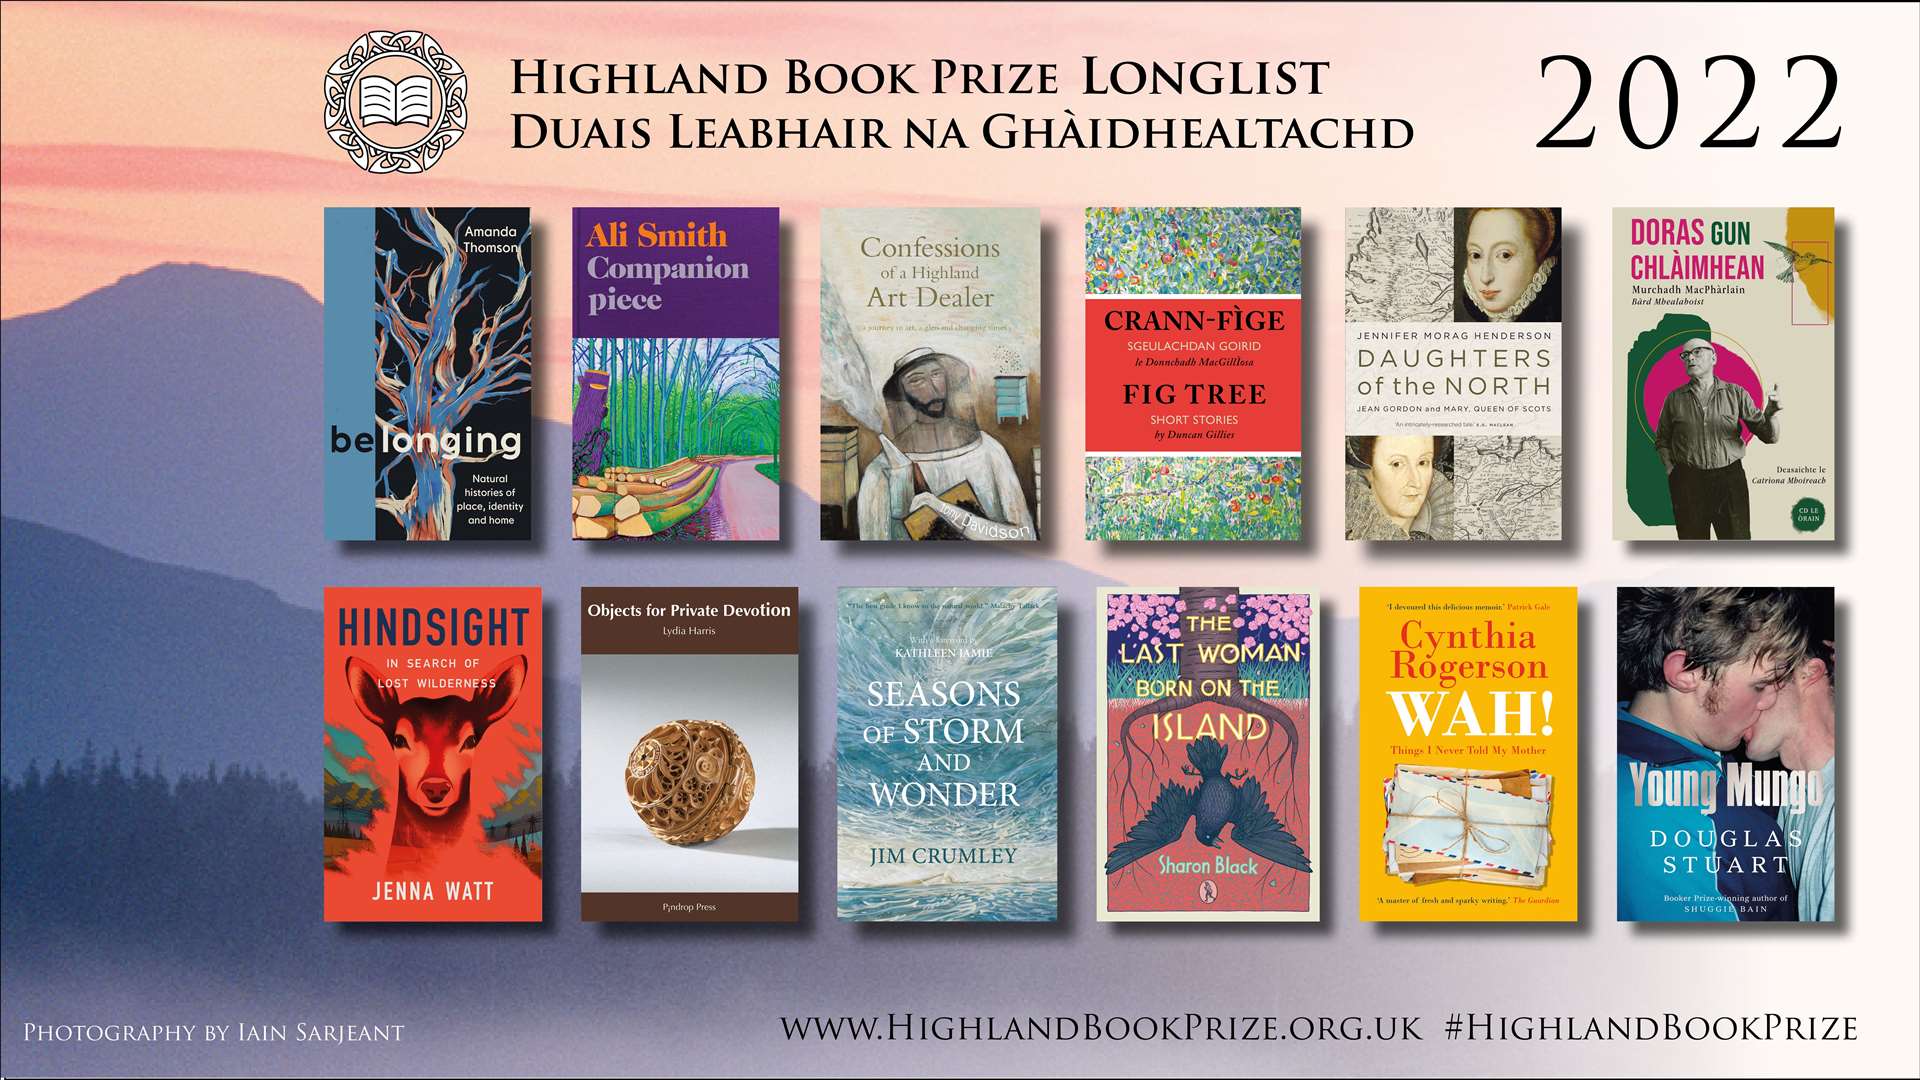 The 12 books longlisted for the Highland Book Prize 2022.